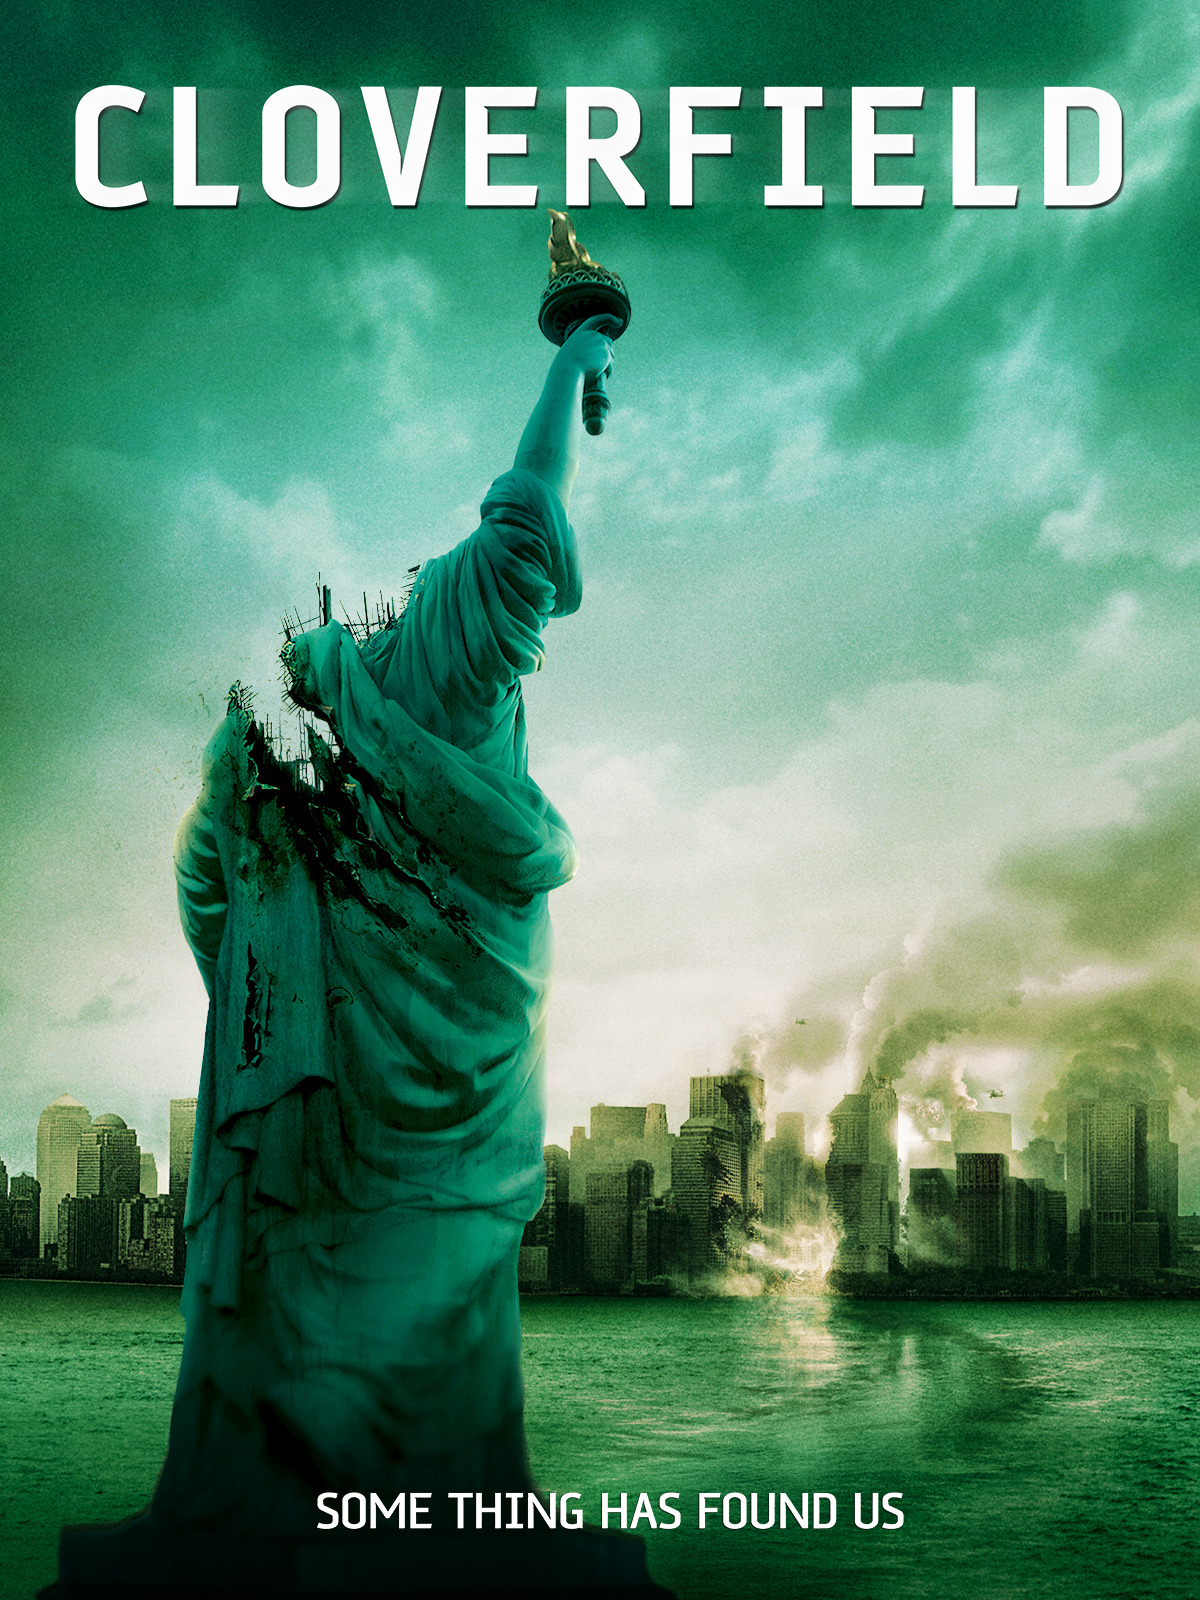 Some Thing Has Found Us – Cloverfield (2008)